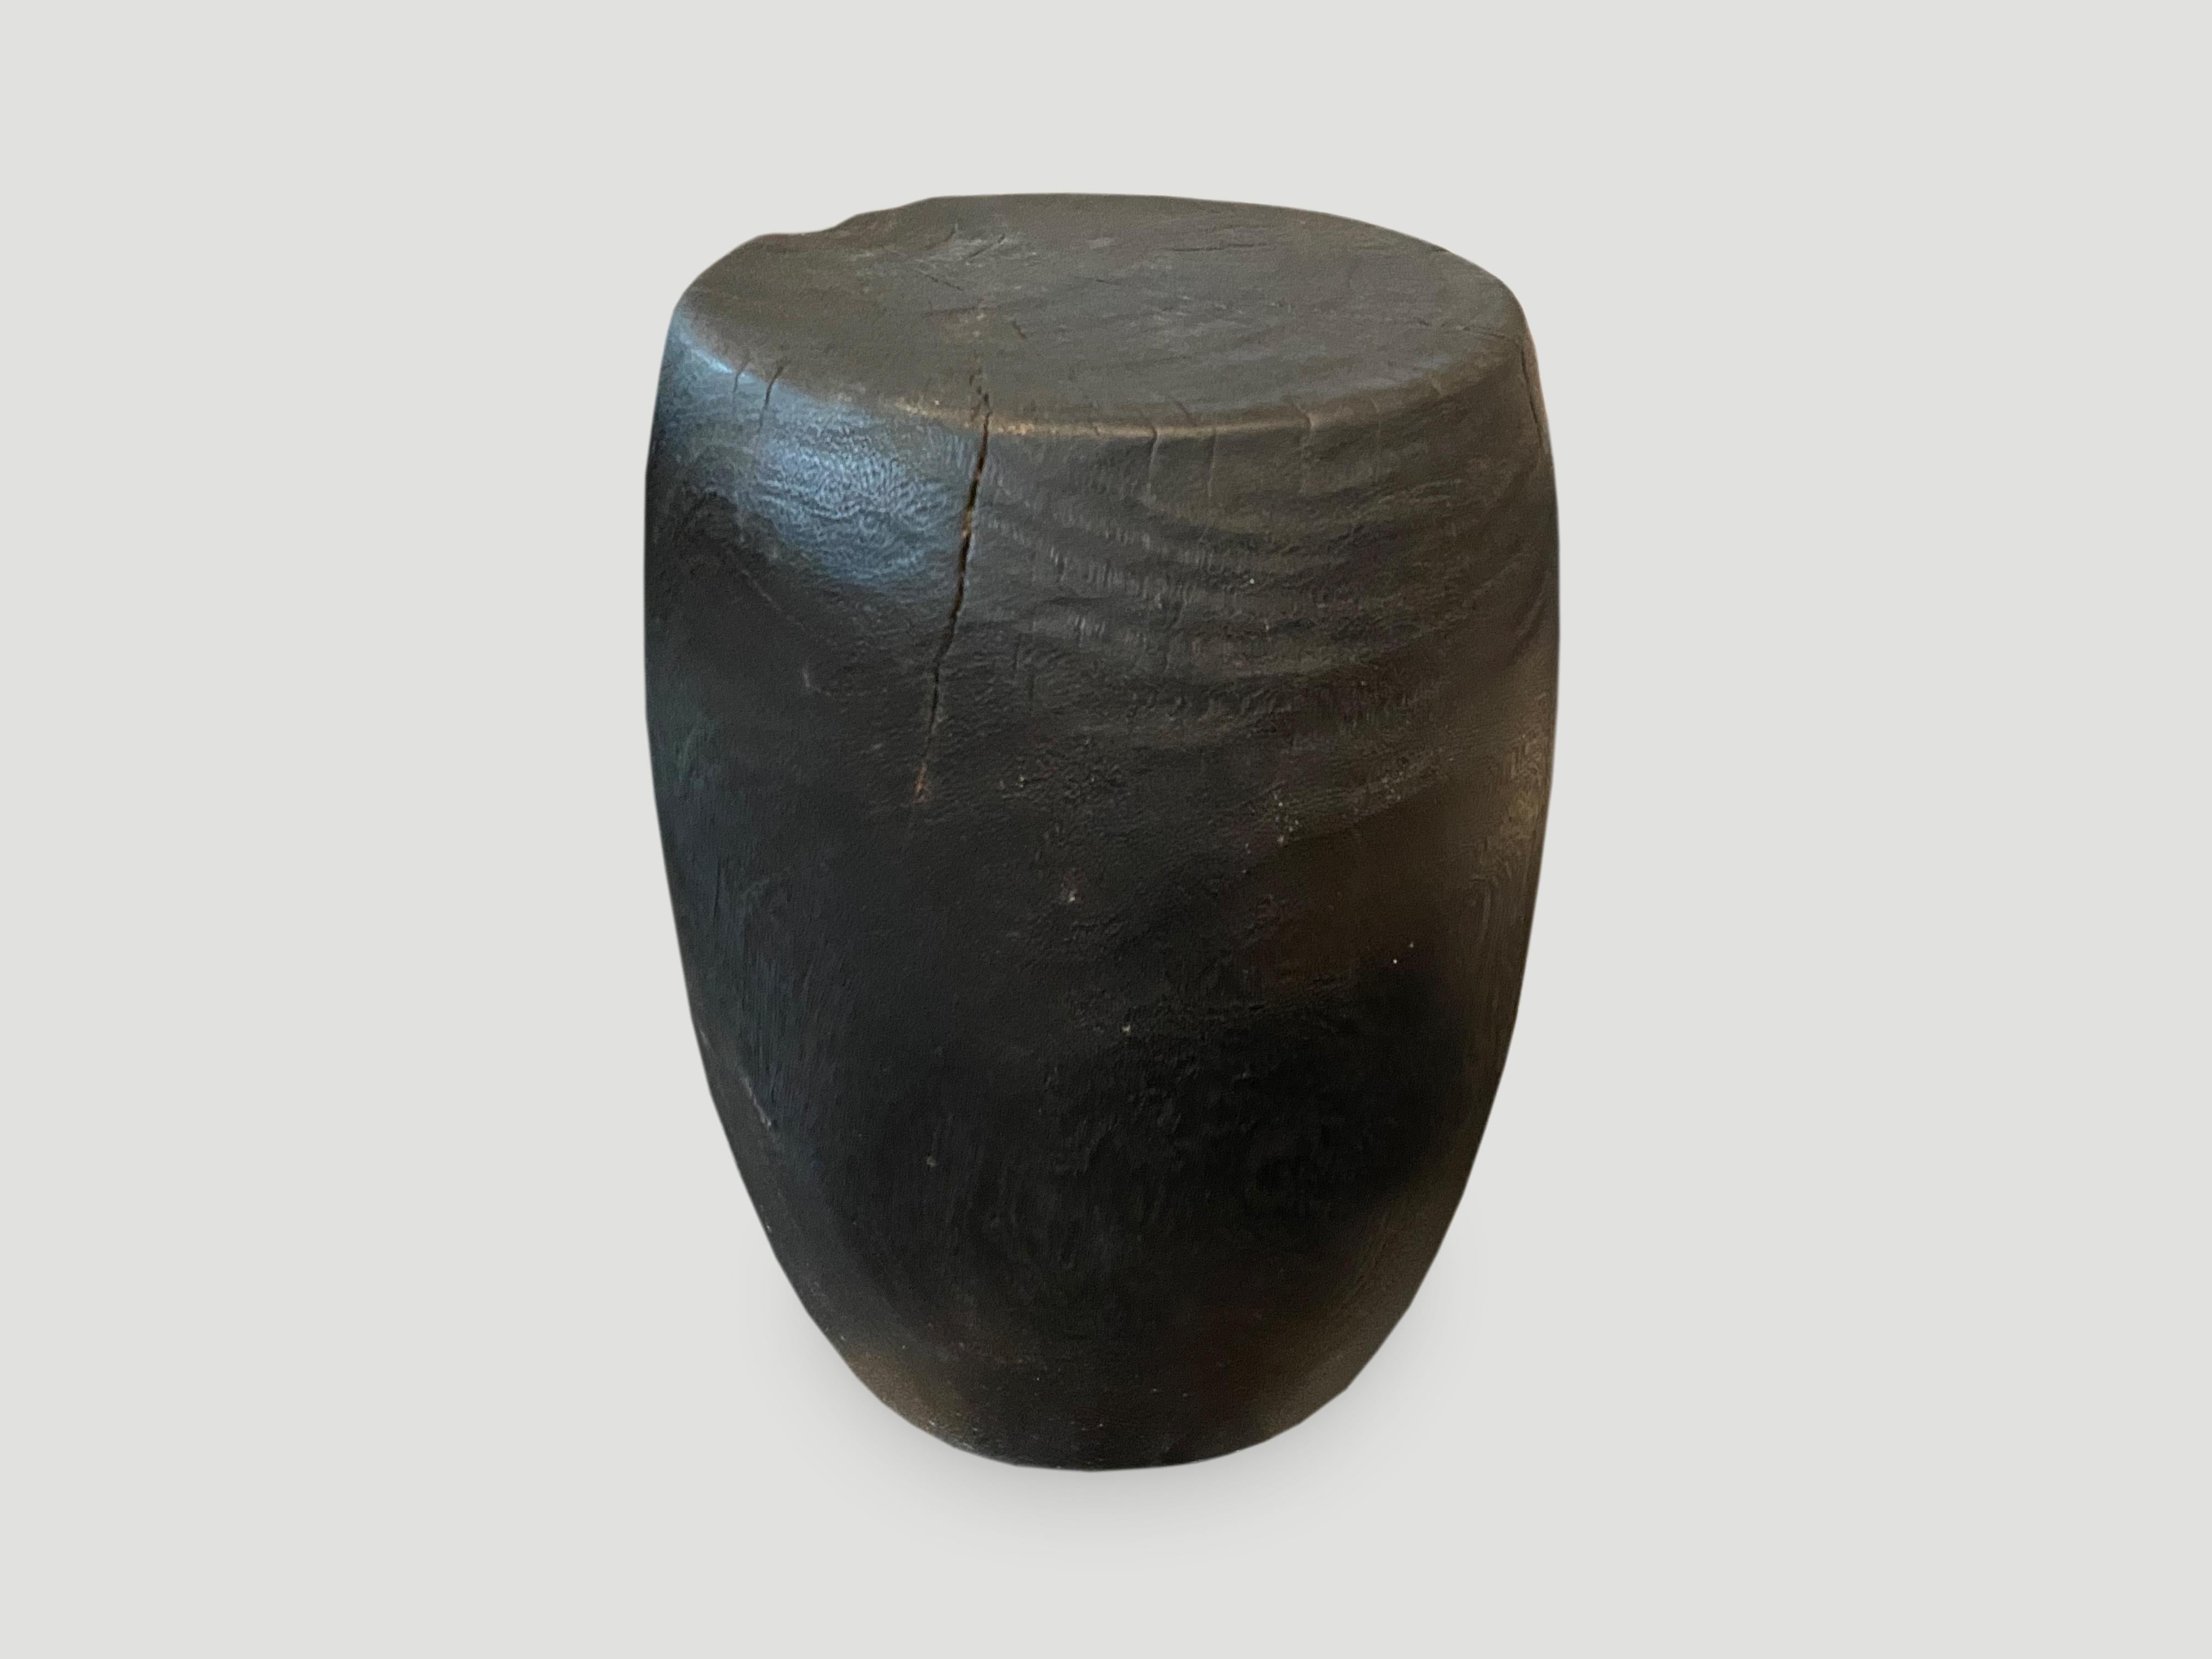 Organic Modern Andrianna Shamaris Charred Drum Style Lychee Wood Side Table or Stool